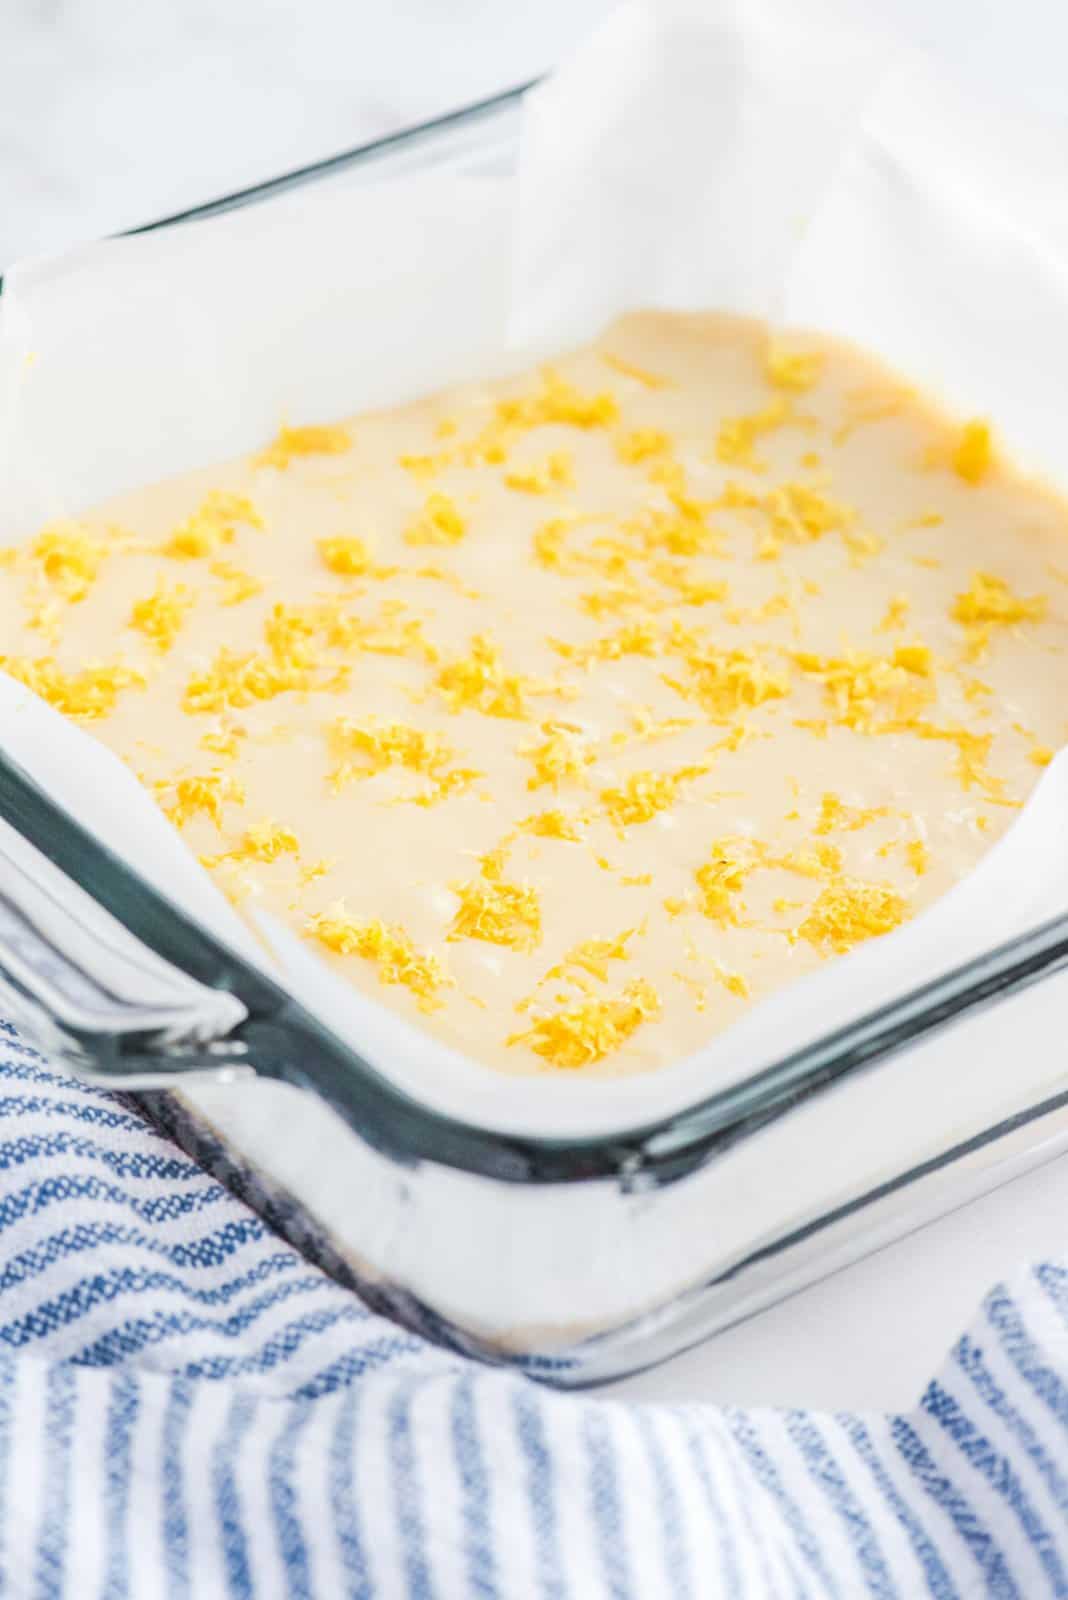 A baking sheet lined with parchment paper with lemon fudge batter with lemon zest on top.